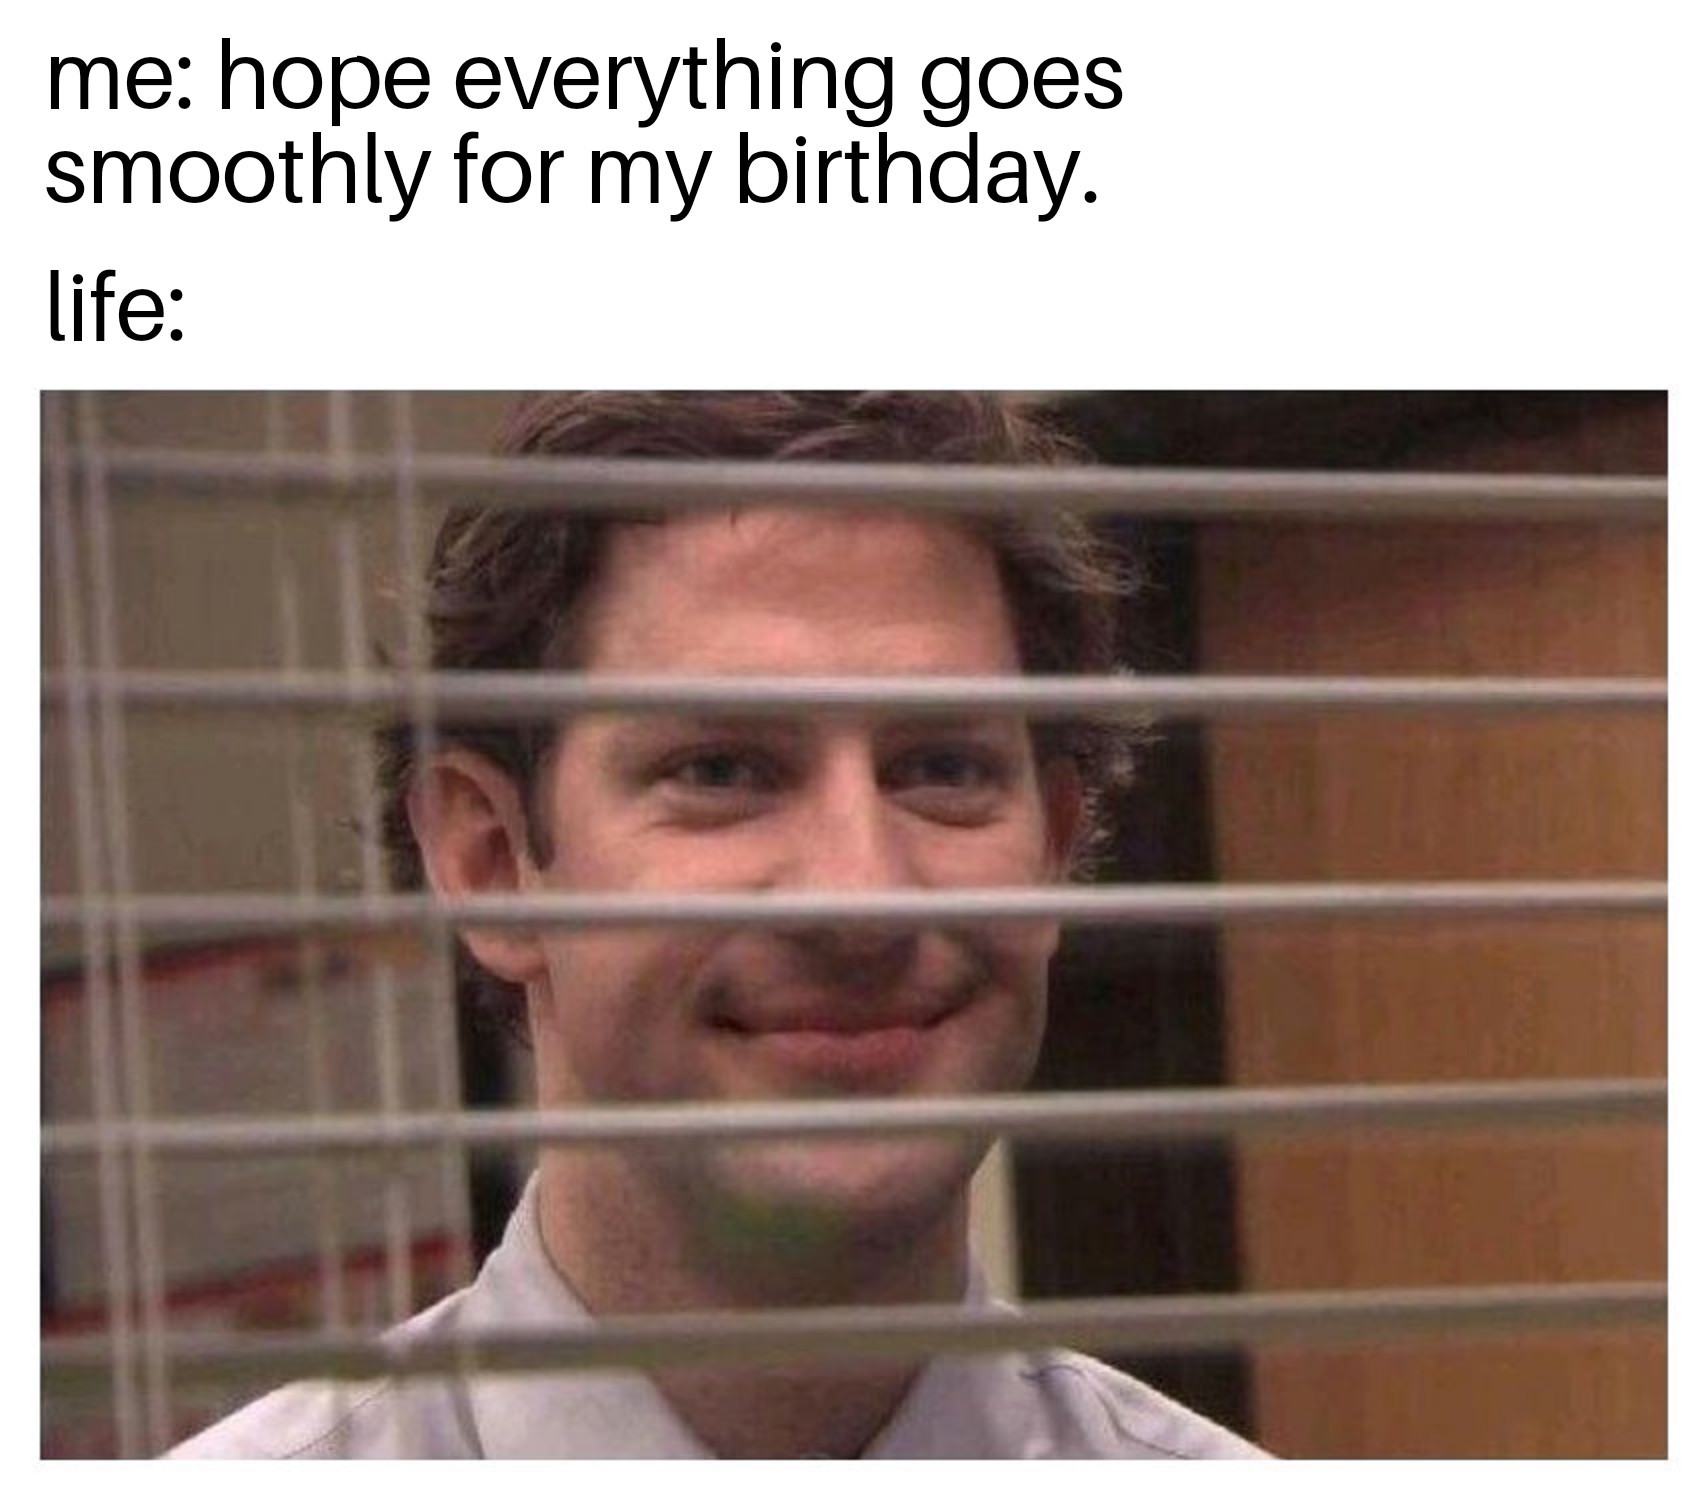 It's my birthday but life have different plans - meme